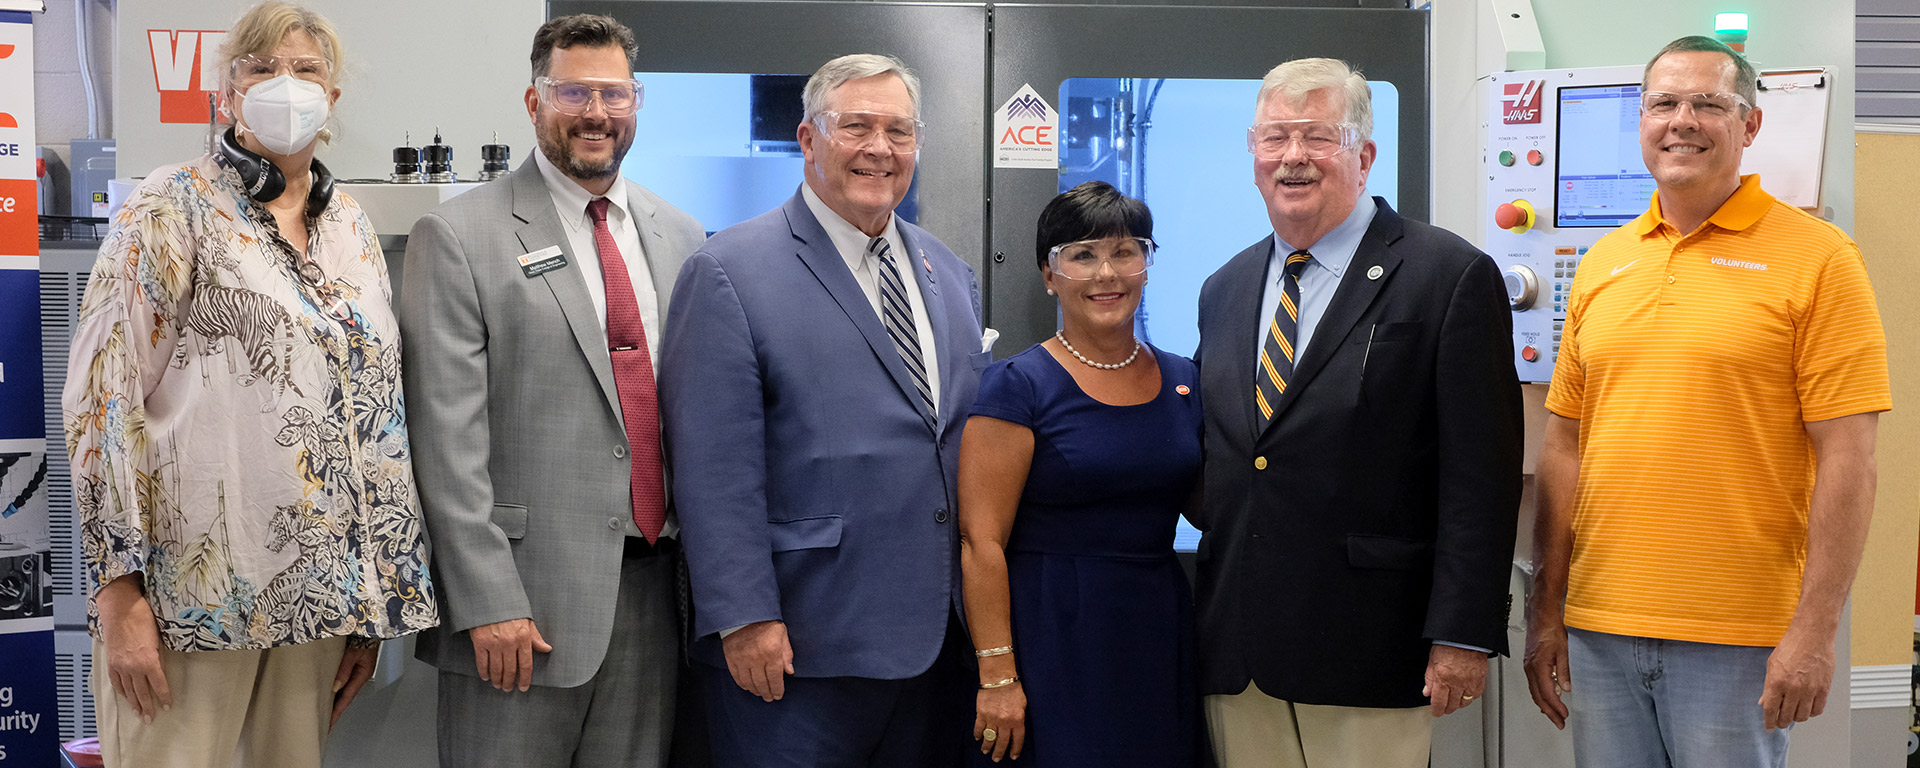 From left: State Rep. Gloria Johnson (D-Knoxville), Tickle College of Engineering Dean Matthew Mench, State Rep. John Ragan (R-Oak Ridge), State Rep. Michele Carringer (R-Knoxville), Lt. Gov. Randy McNally and UT Professor Tony Schmitz pose for a photo at the ACE “train the trainers” event at UT. Photo By: IACMI/Shawn Millsaps